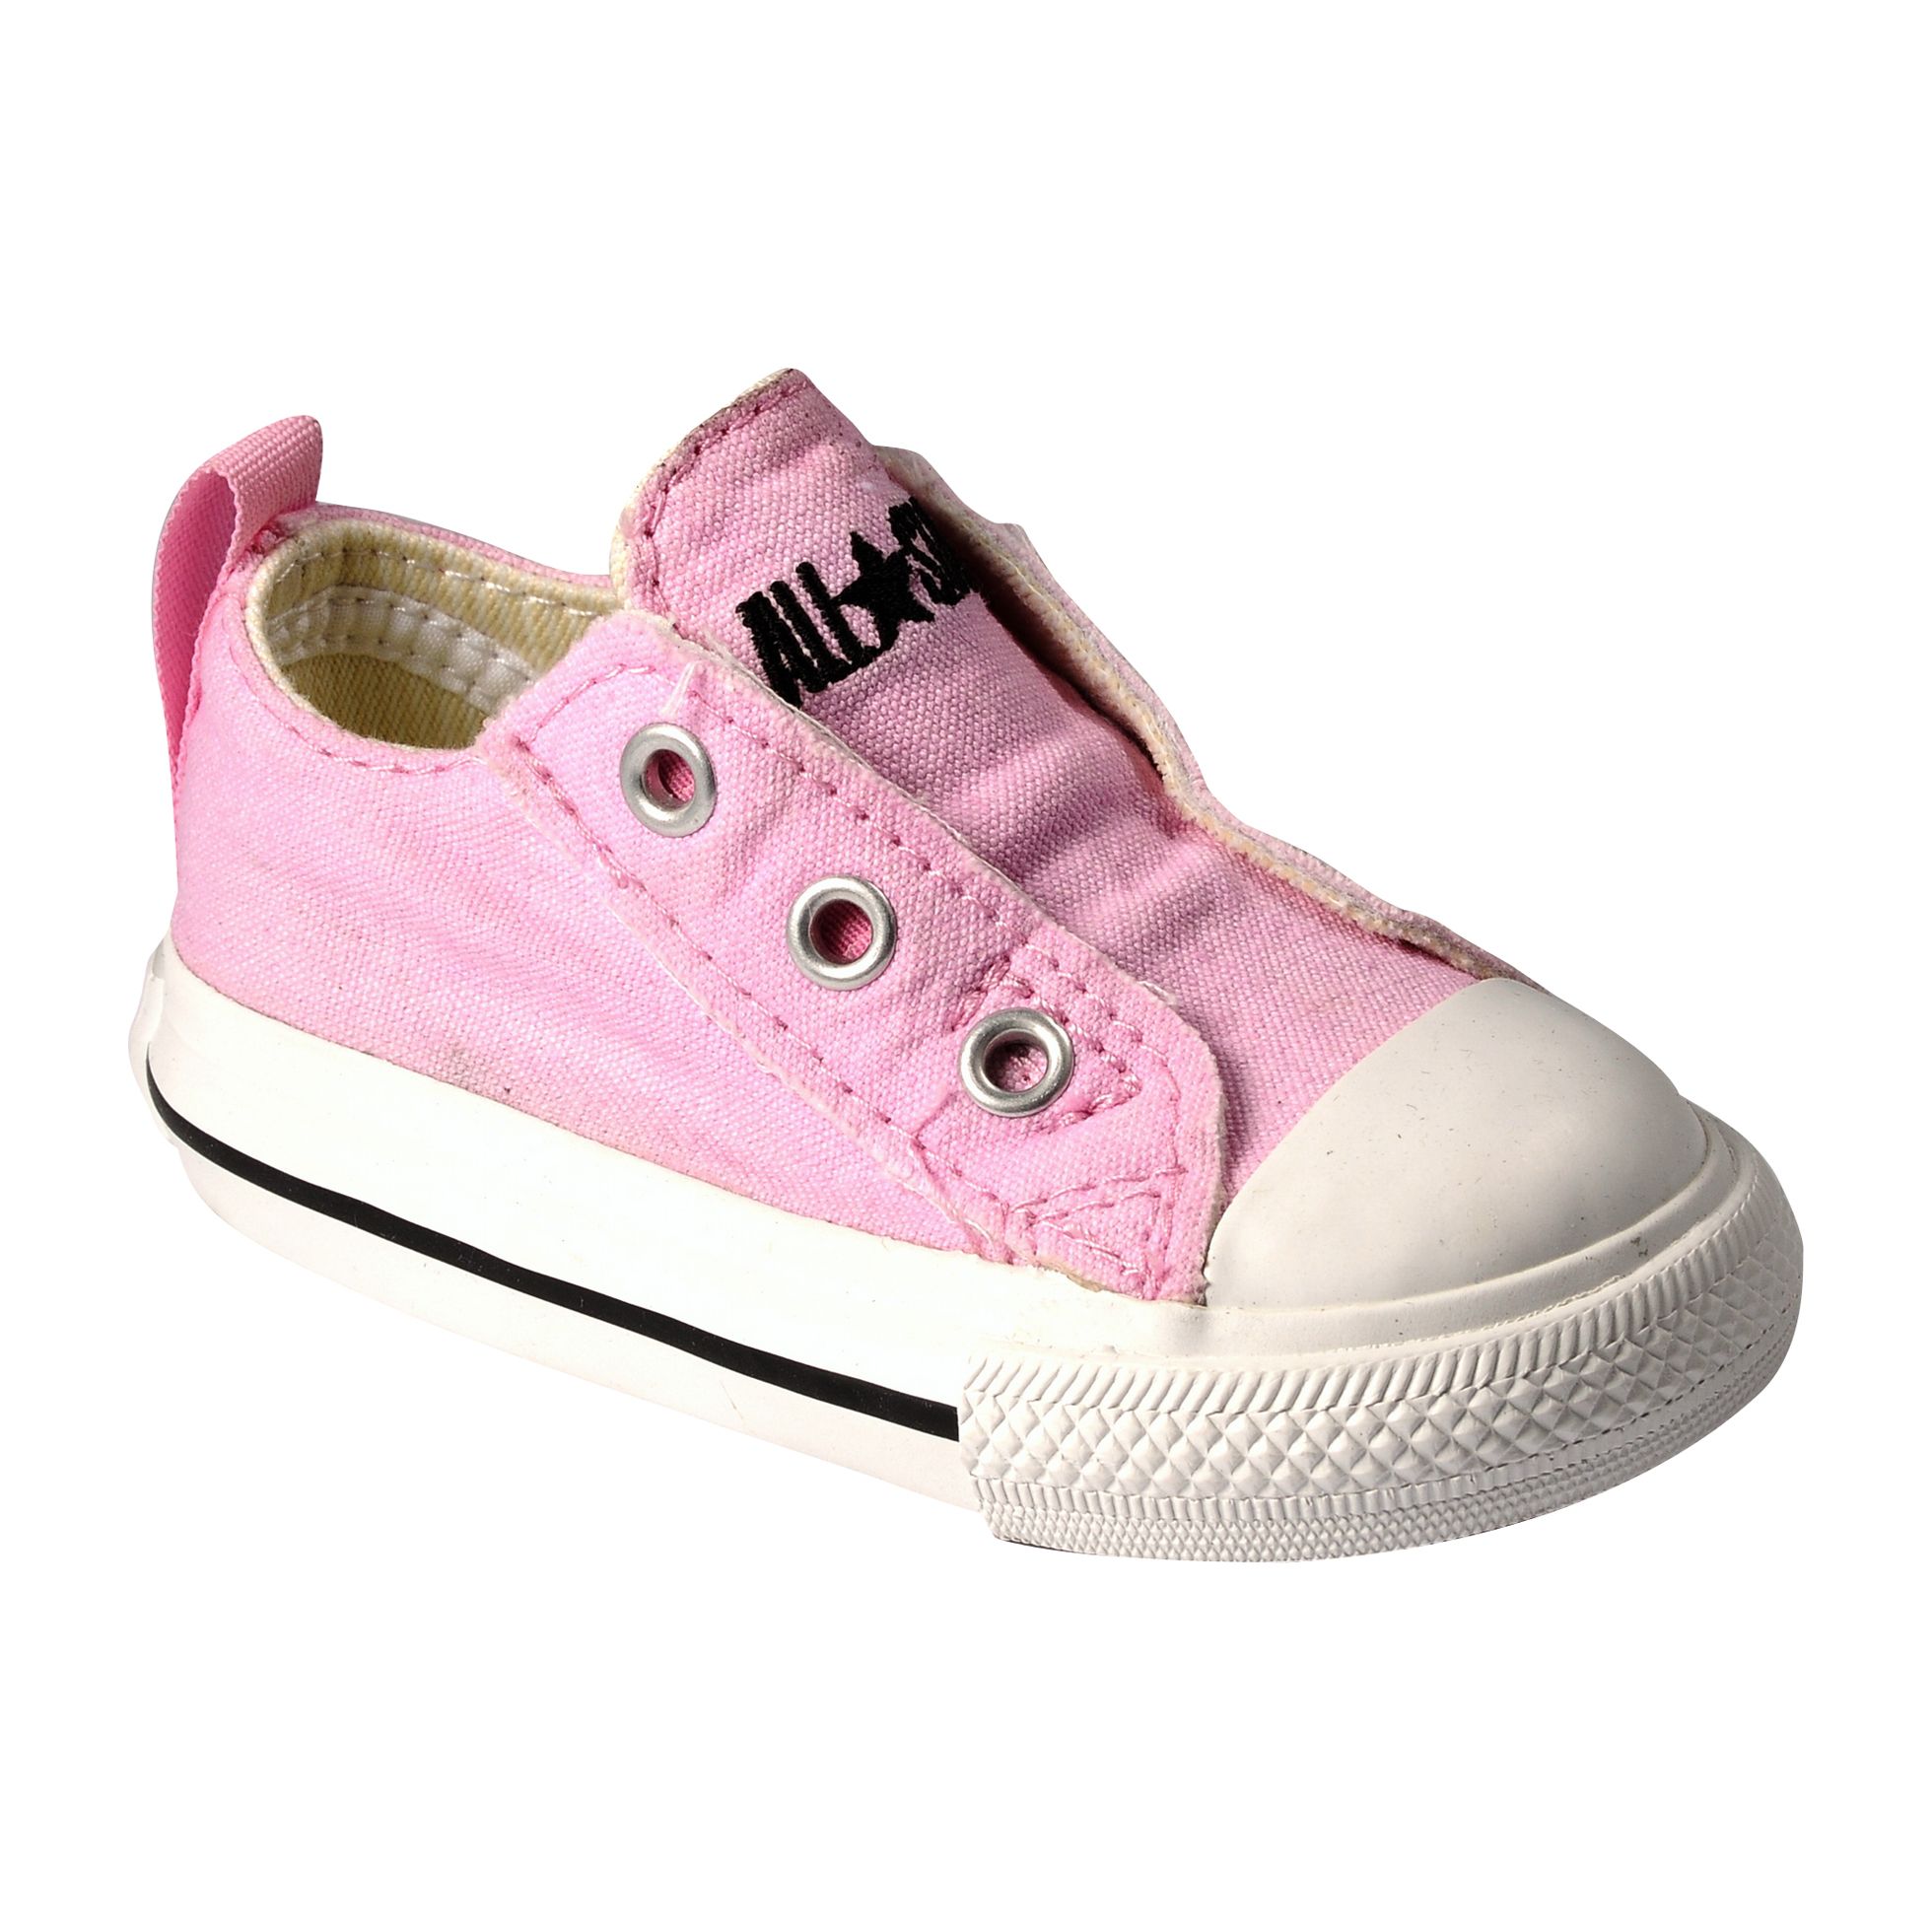 Converse Infant/Toddler Girl's Chuck Taylor All Star Slip-On Shoe - Pink 2 - (Infant)